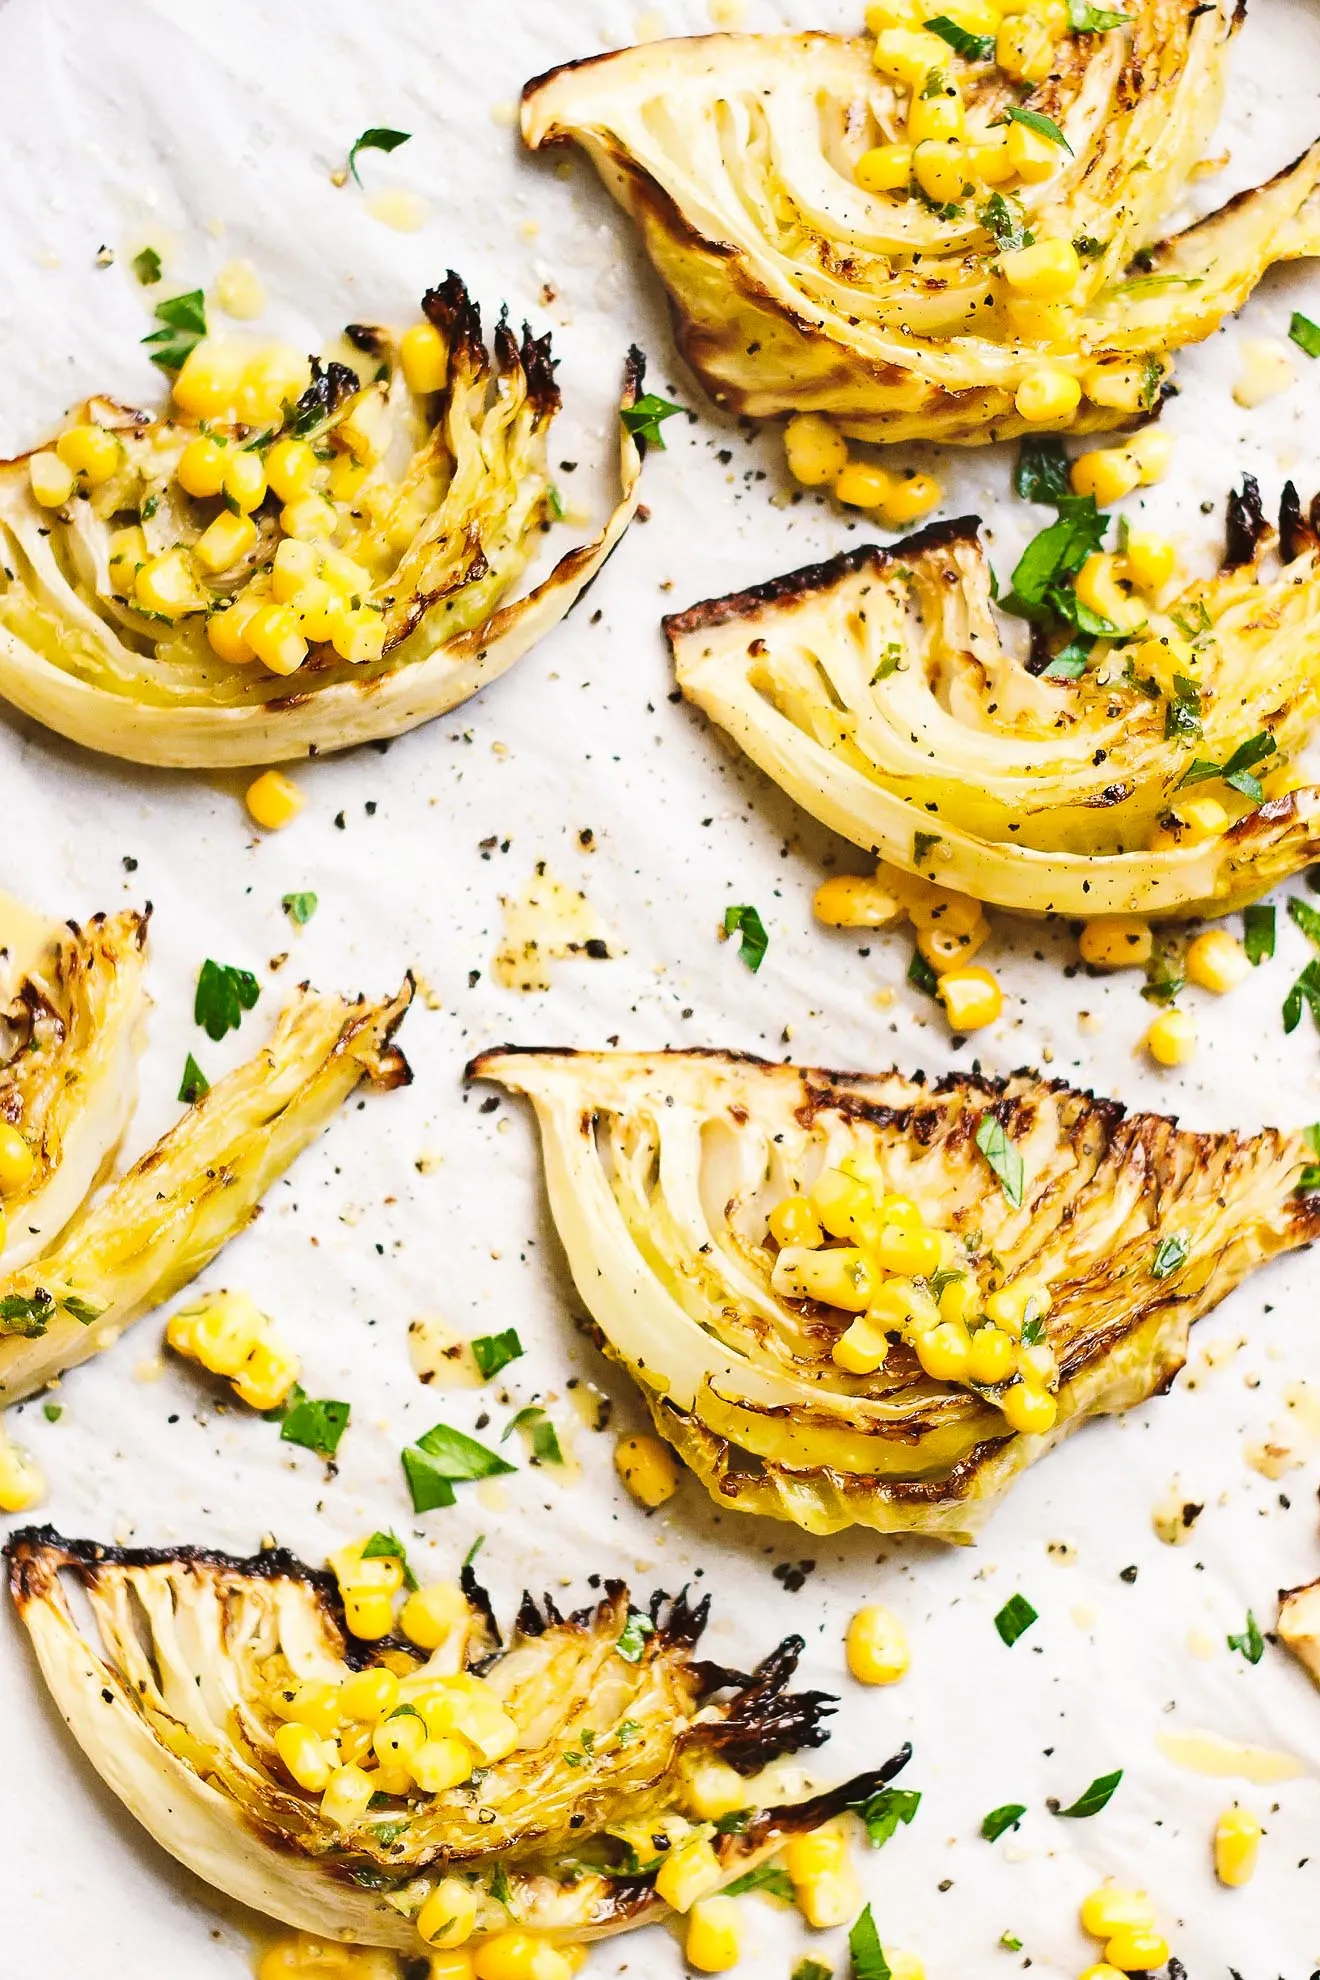 Roasted Cabbage with Sweet Corn + Spicy Vinaigrette | Roasted cabbage wedges with sweet corn and a roasted, spicy vinaigrette is an easy, satisfying summery meal. Naturally gluten-free and vegan. 